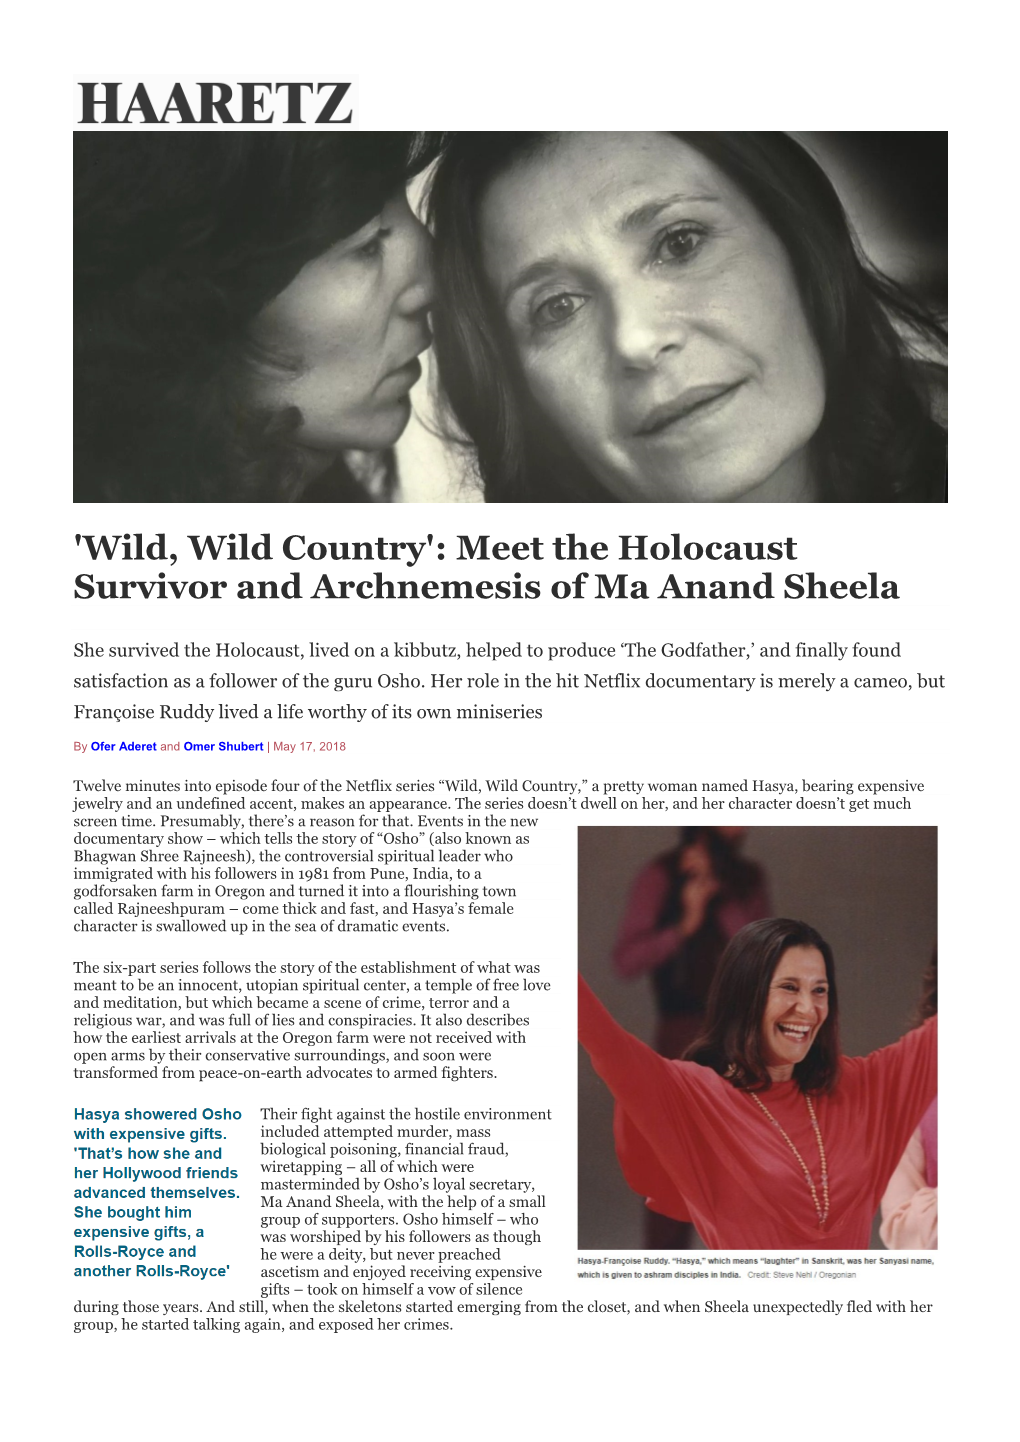 'Wild, Wild Country': Meet the Holocaust Survivor and Archnemesis of Ma Anand Sheela